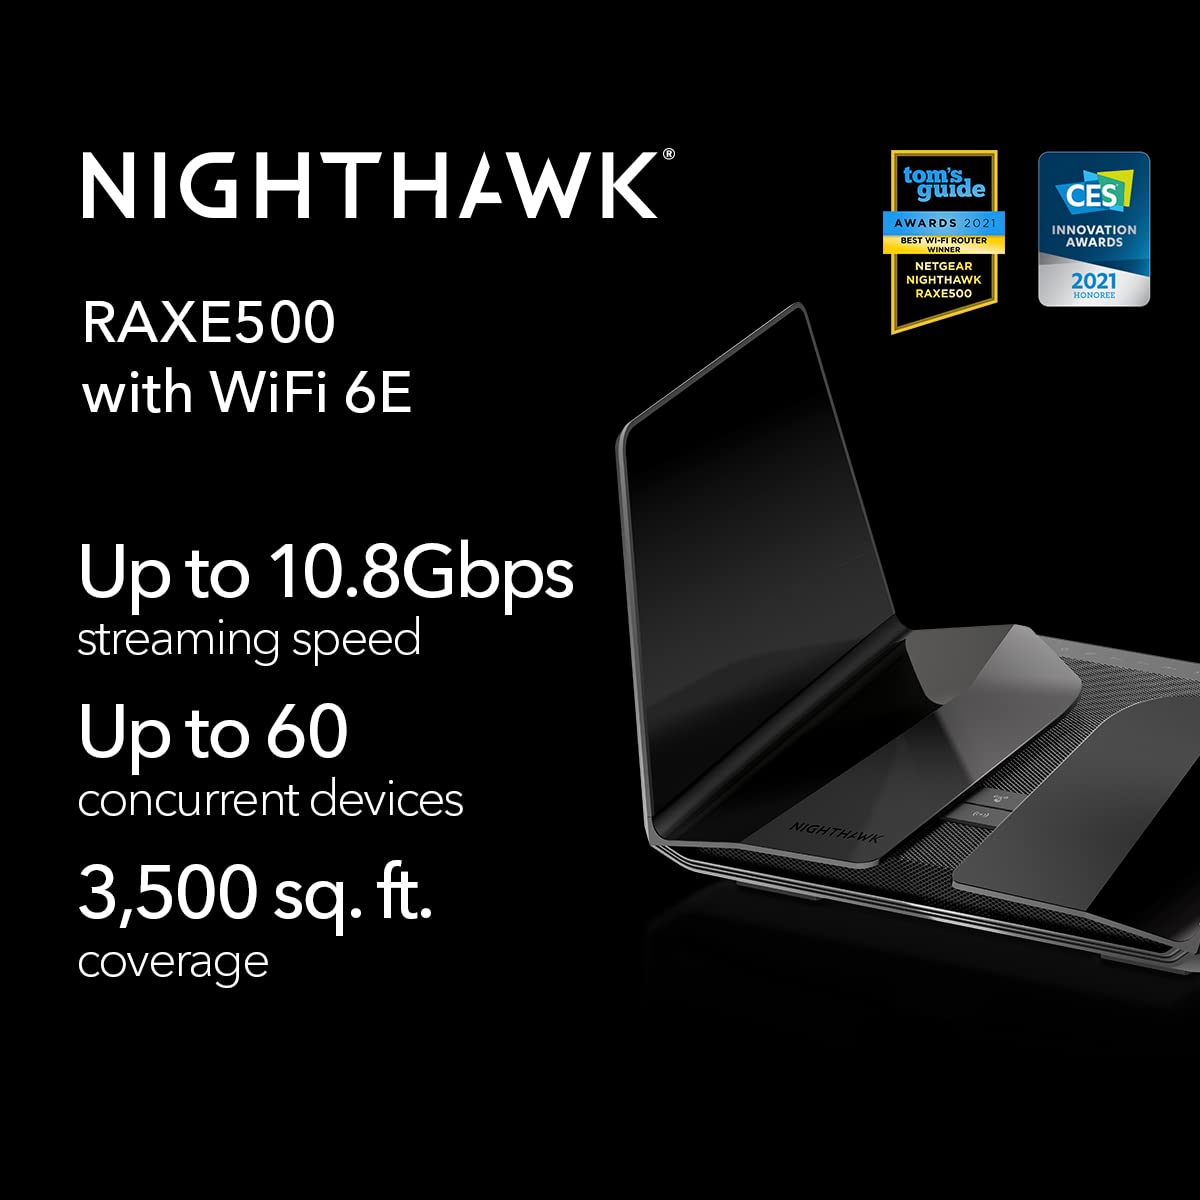 NETGEAR Nighthawk 12-Stream WiFi 6E Router (RAXE500) | AXE11000 Tri-Band Wireless Speed (Up to 10.8Gbps) |New 6GHz Band | Coverage up to 3,500 sq. ft., 60 Devices